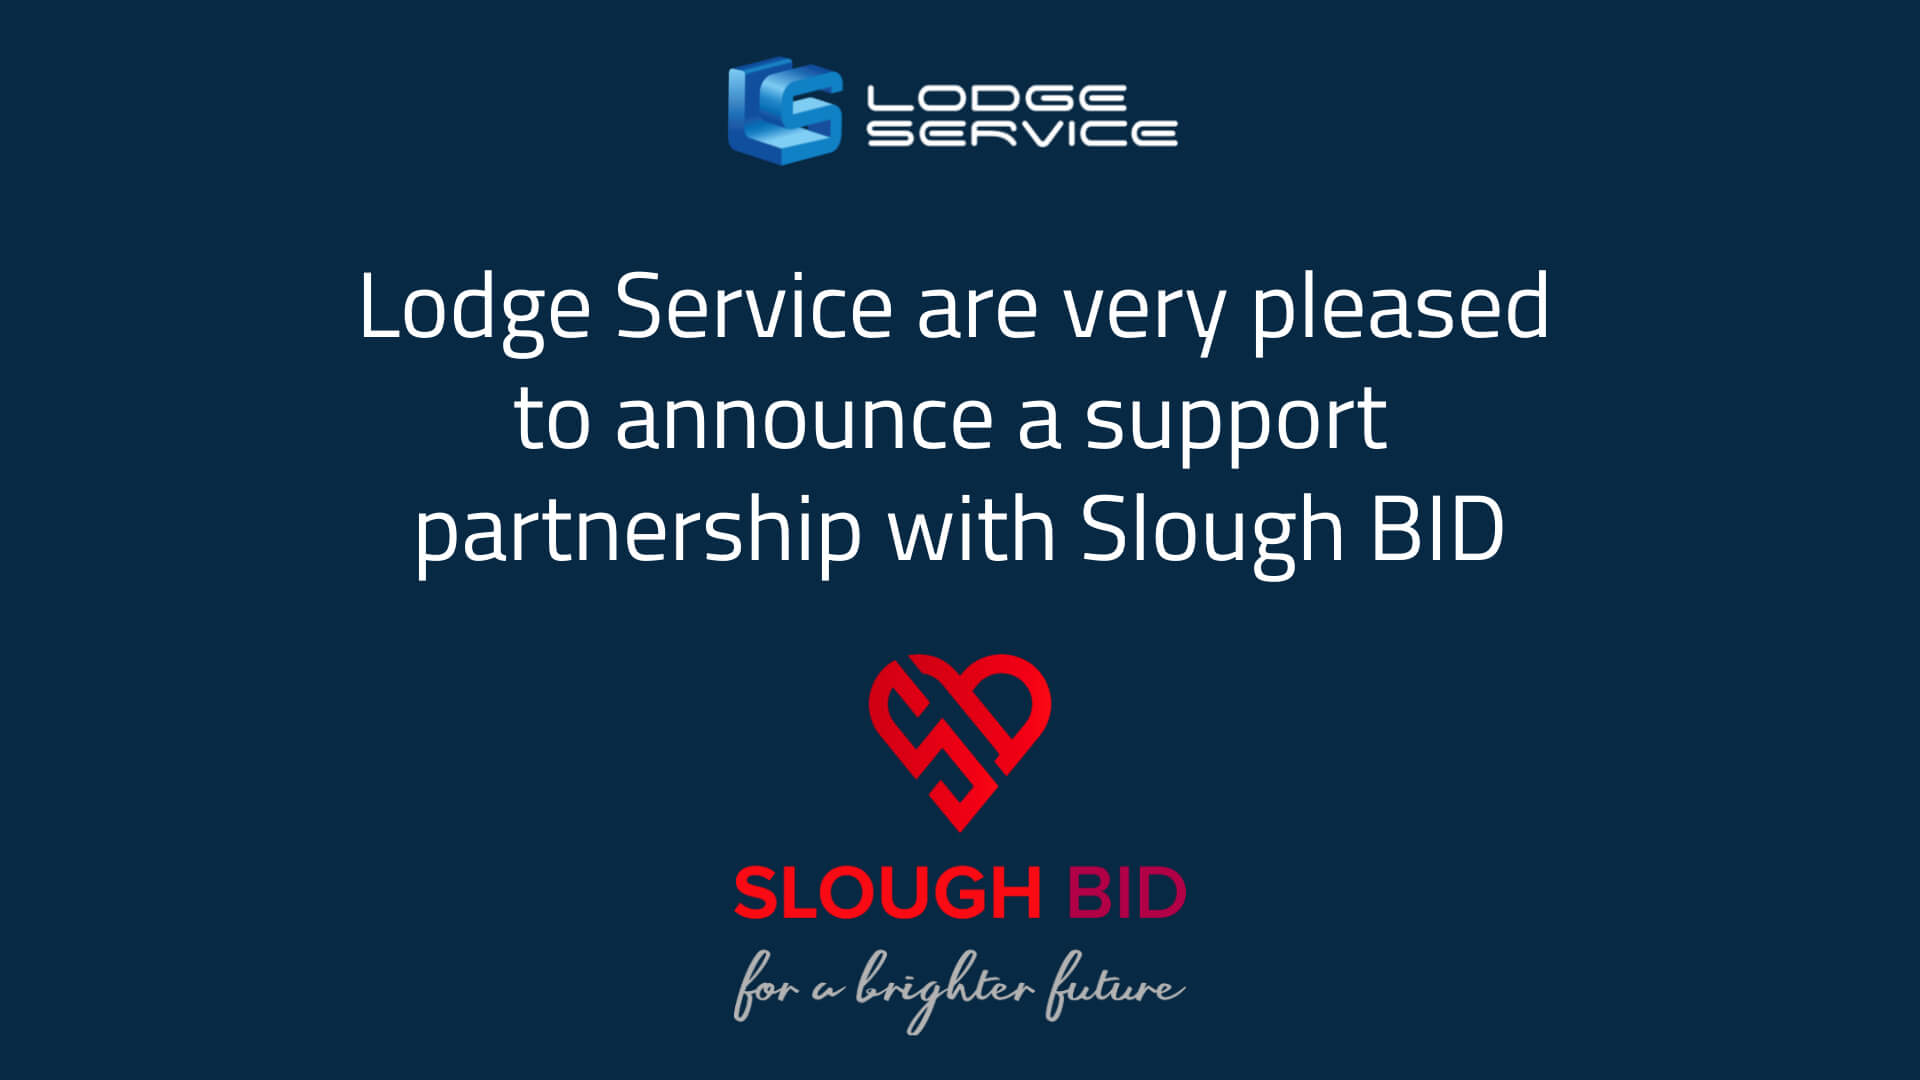 Lodge Service are very pleased to announce a support partnership with Slough BID